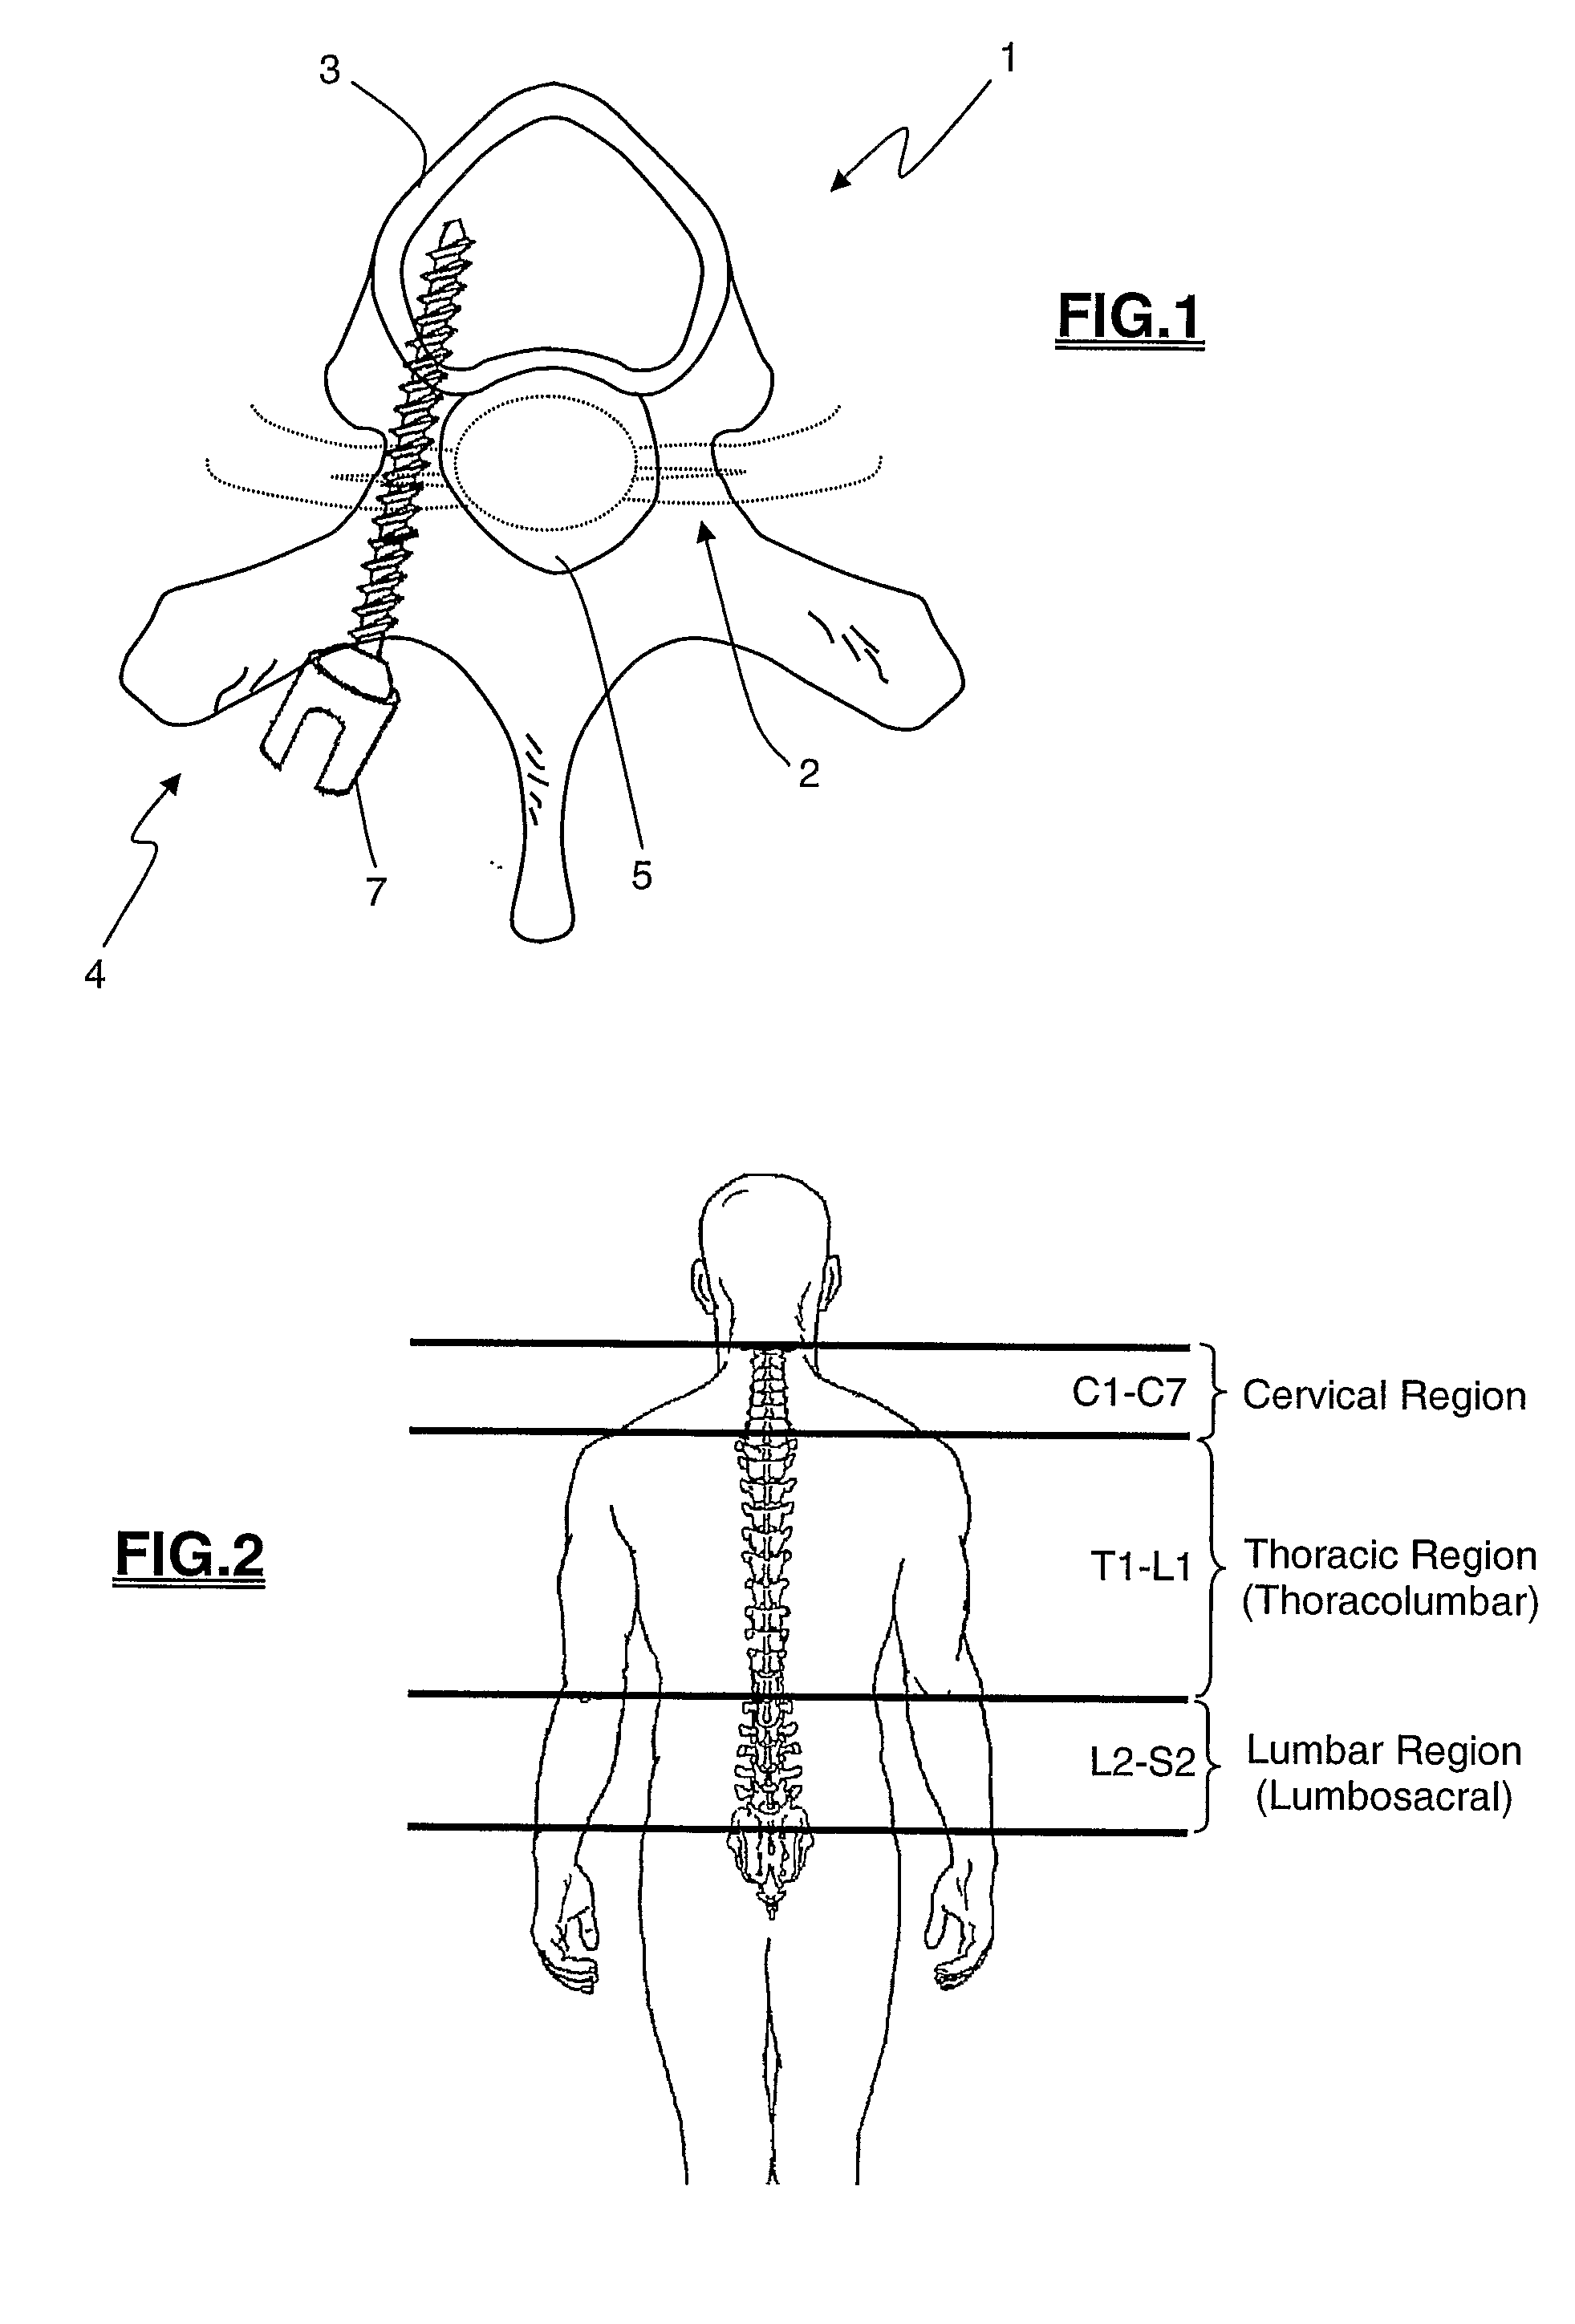 System and Methods for Performing Pedicle Integrity Assessments of the Thoracic Spine